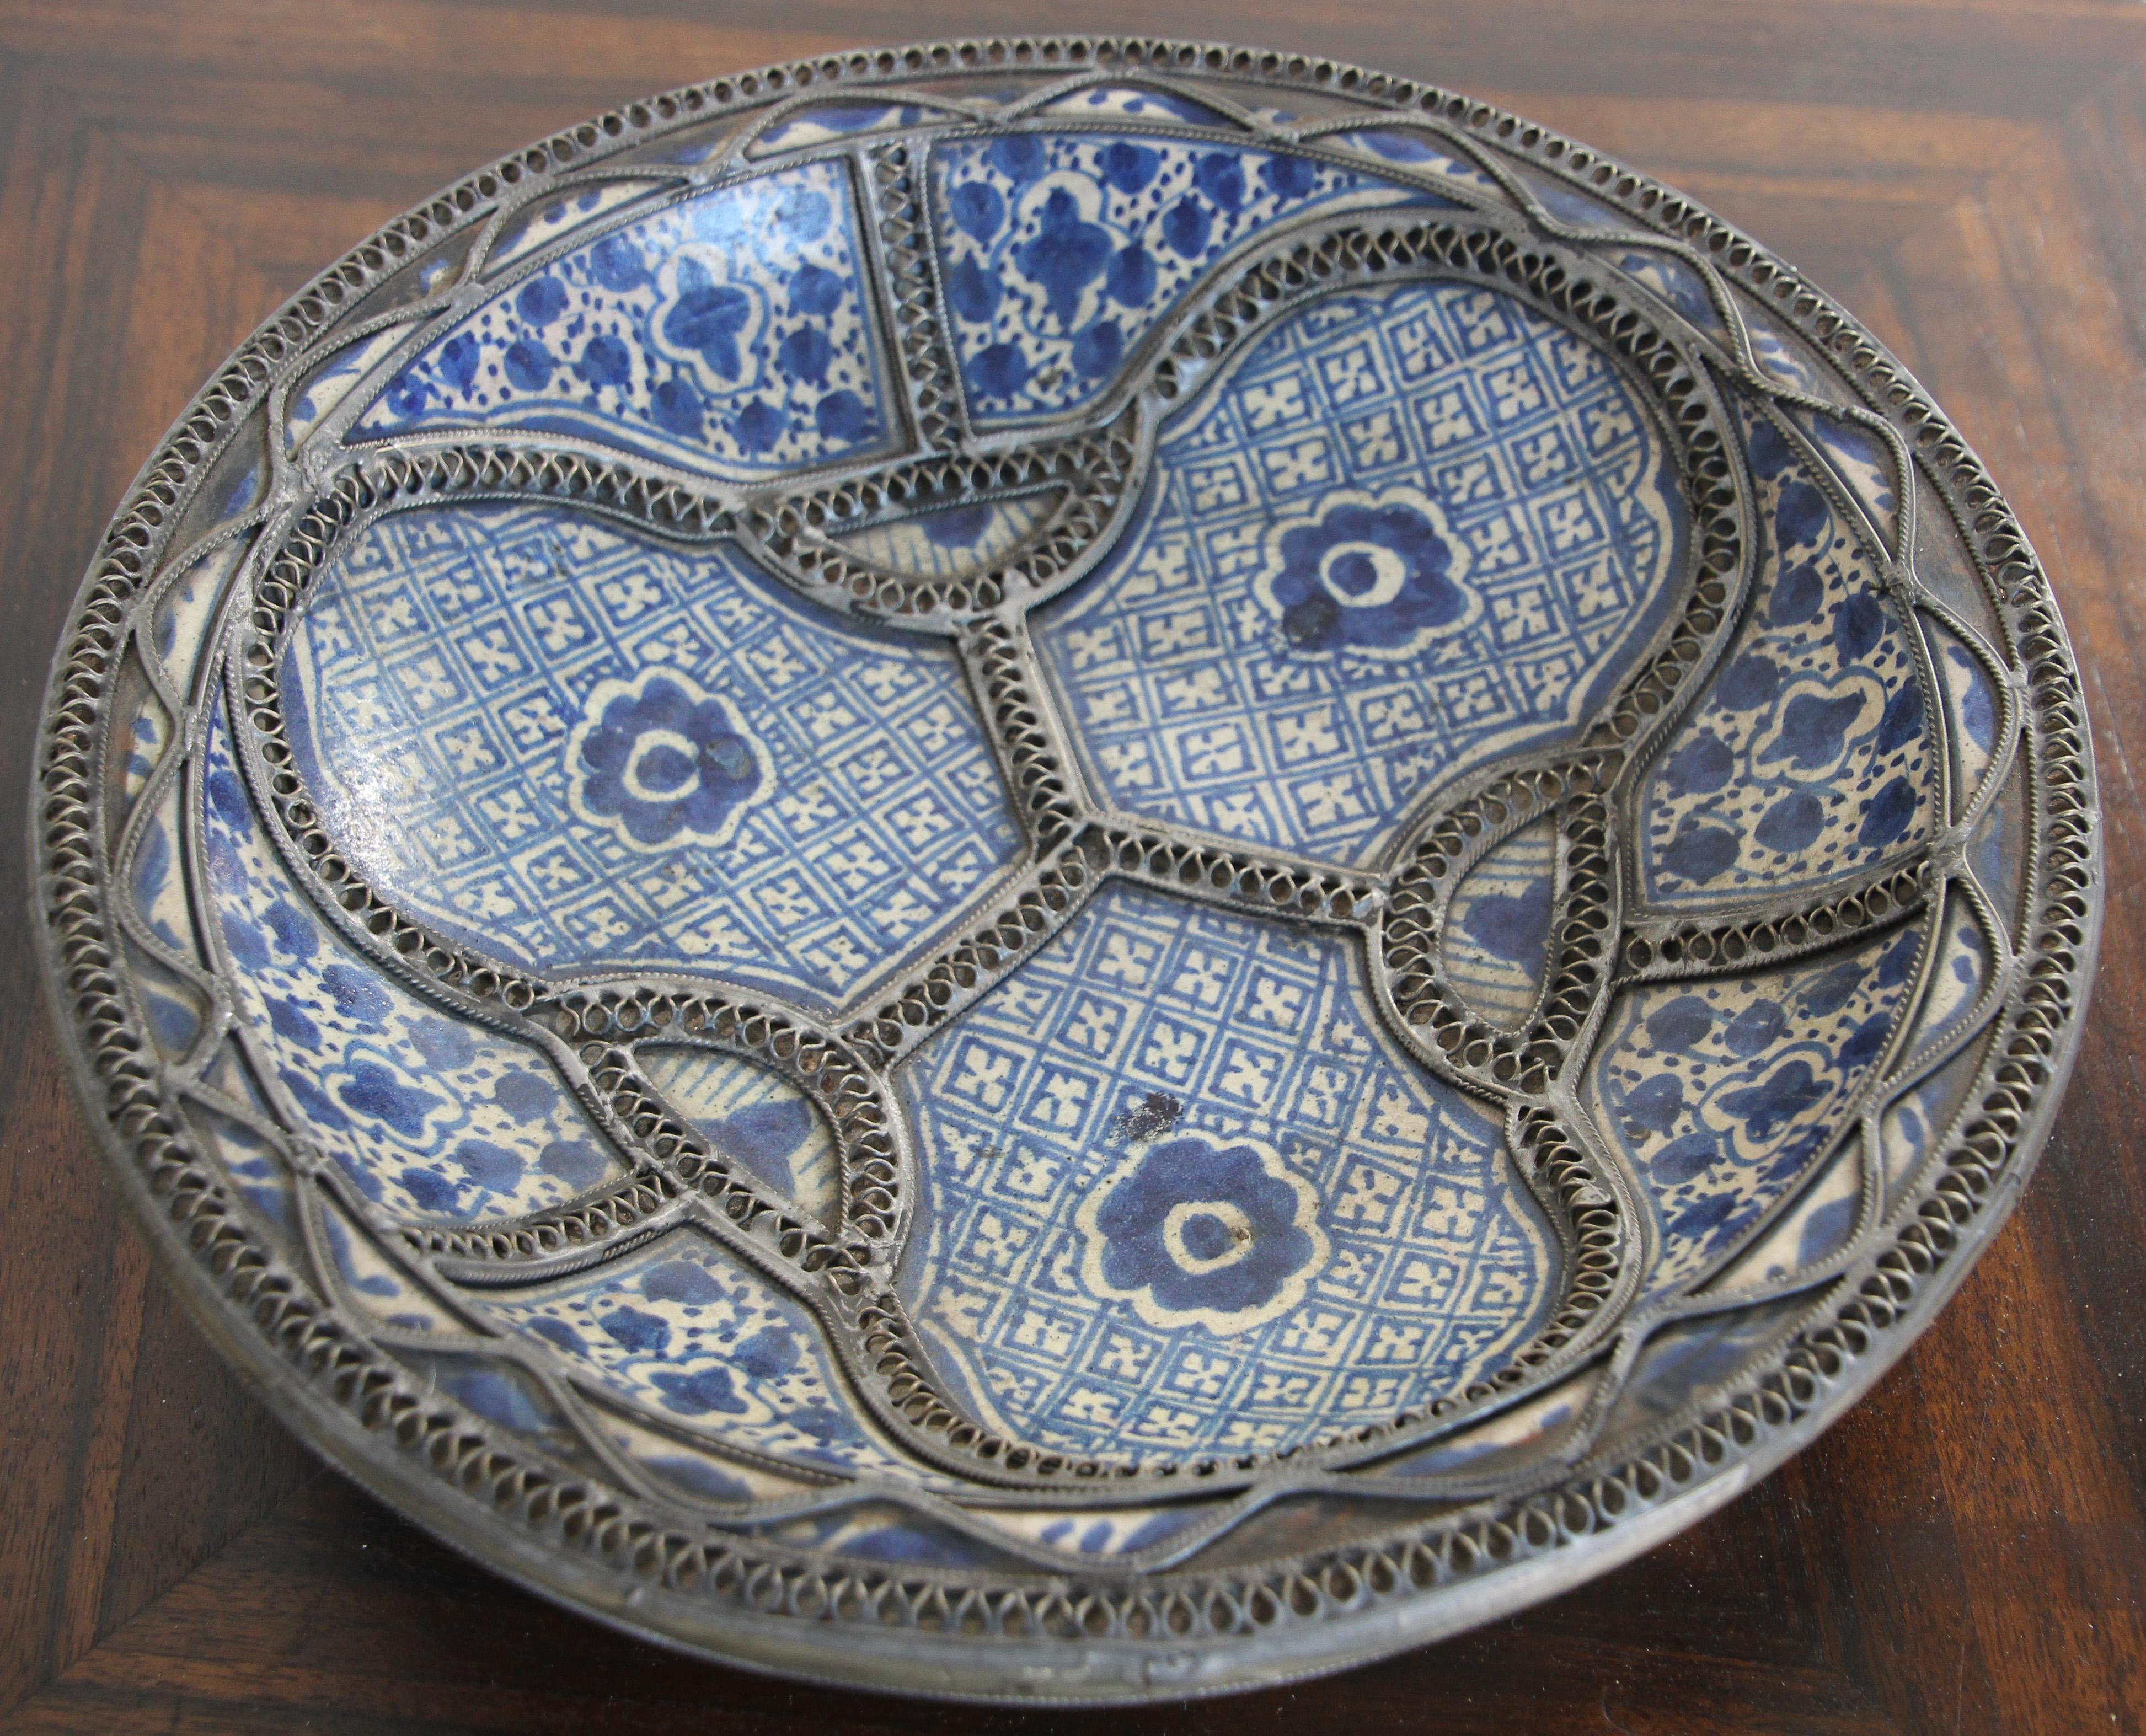 Handcrafted Moorish Moroccan polychrome decorative ceramic Bowl, dish from Fez. 
Bleu de Fez, very nice designs hand painted by artist in Fez.
Geometrical and floral Moorish designs and adorned with nickel silver filigree designs.
Glazed